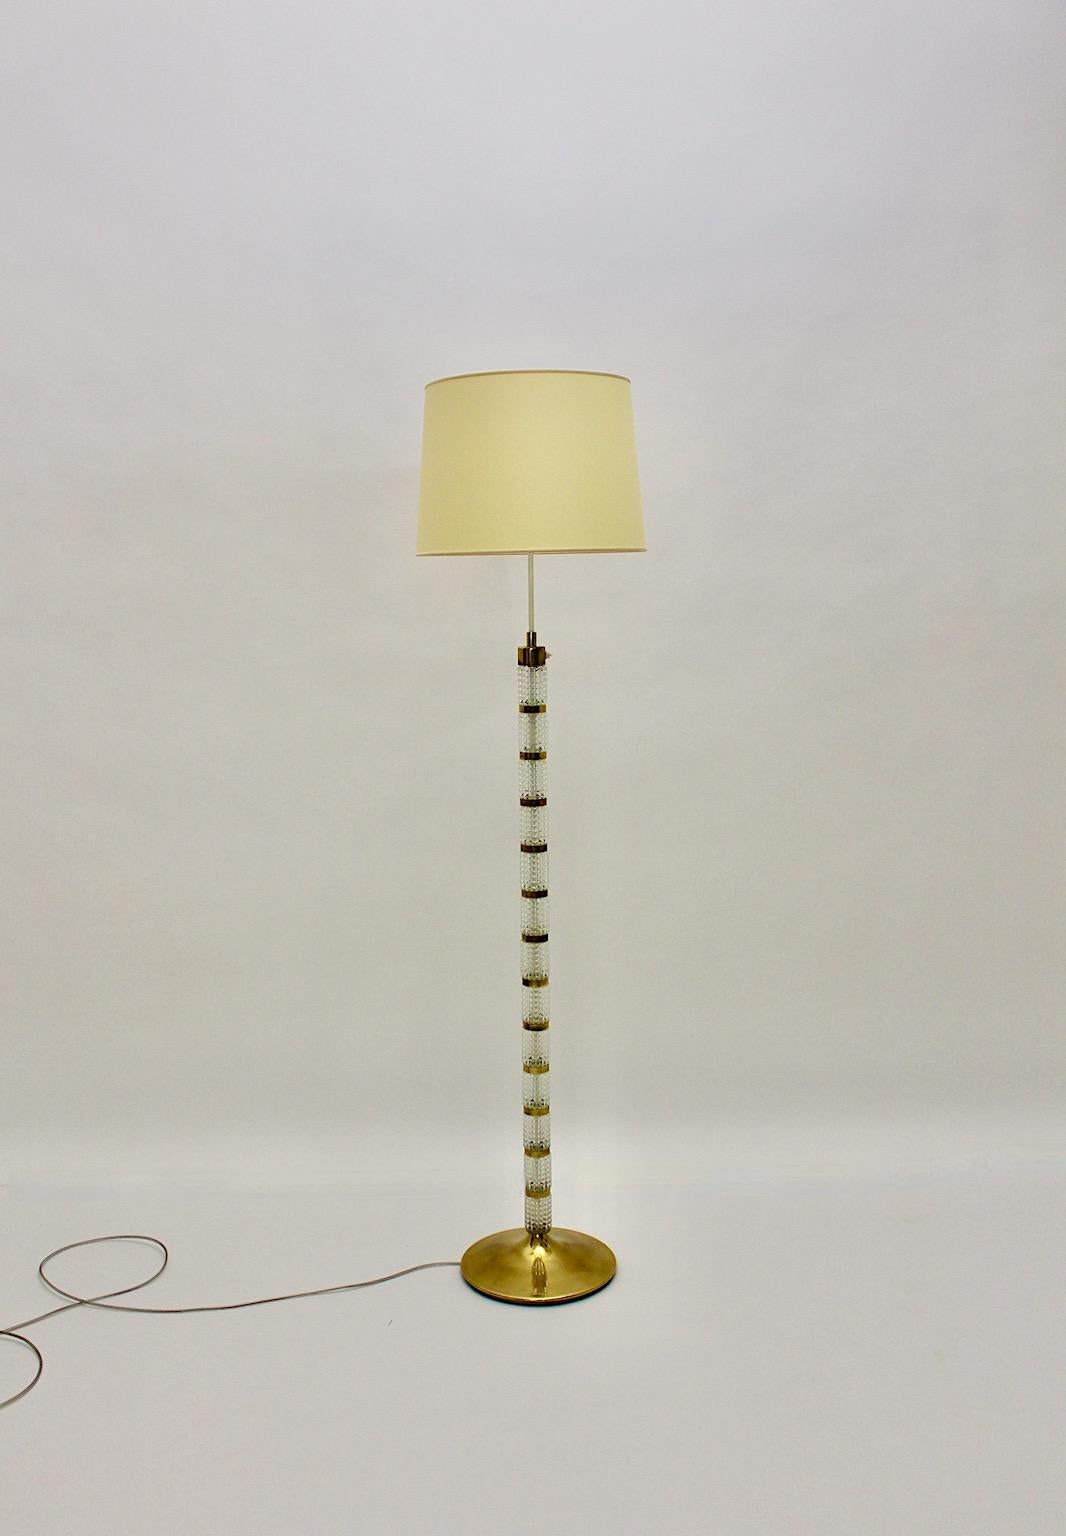 Mid-Century Modern vintage floor lamp from brass and glass by
Richard Essig 1960s Germany.
A stunning floor lamp from structured glass elements combined with brass details features a new custom made lamp shade in its original shape from ivory or